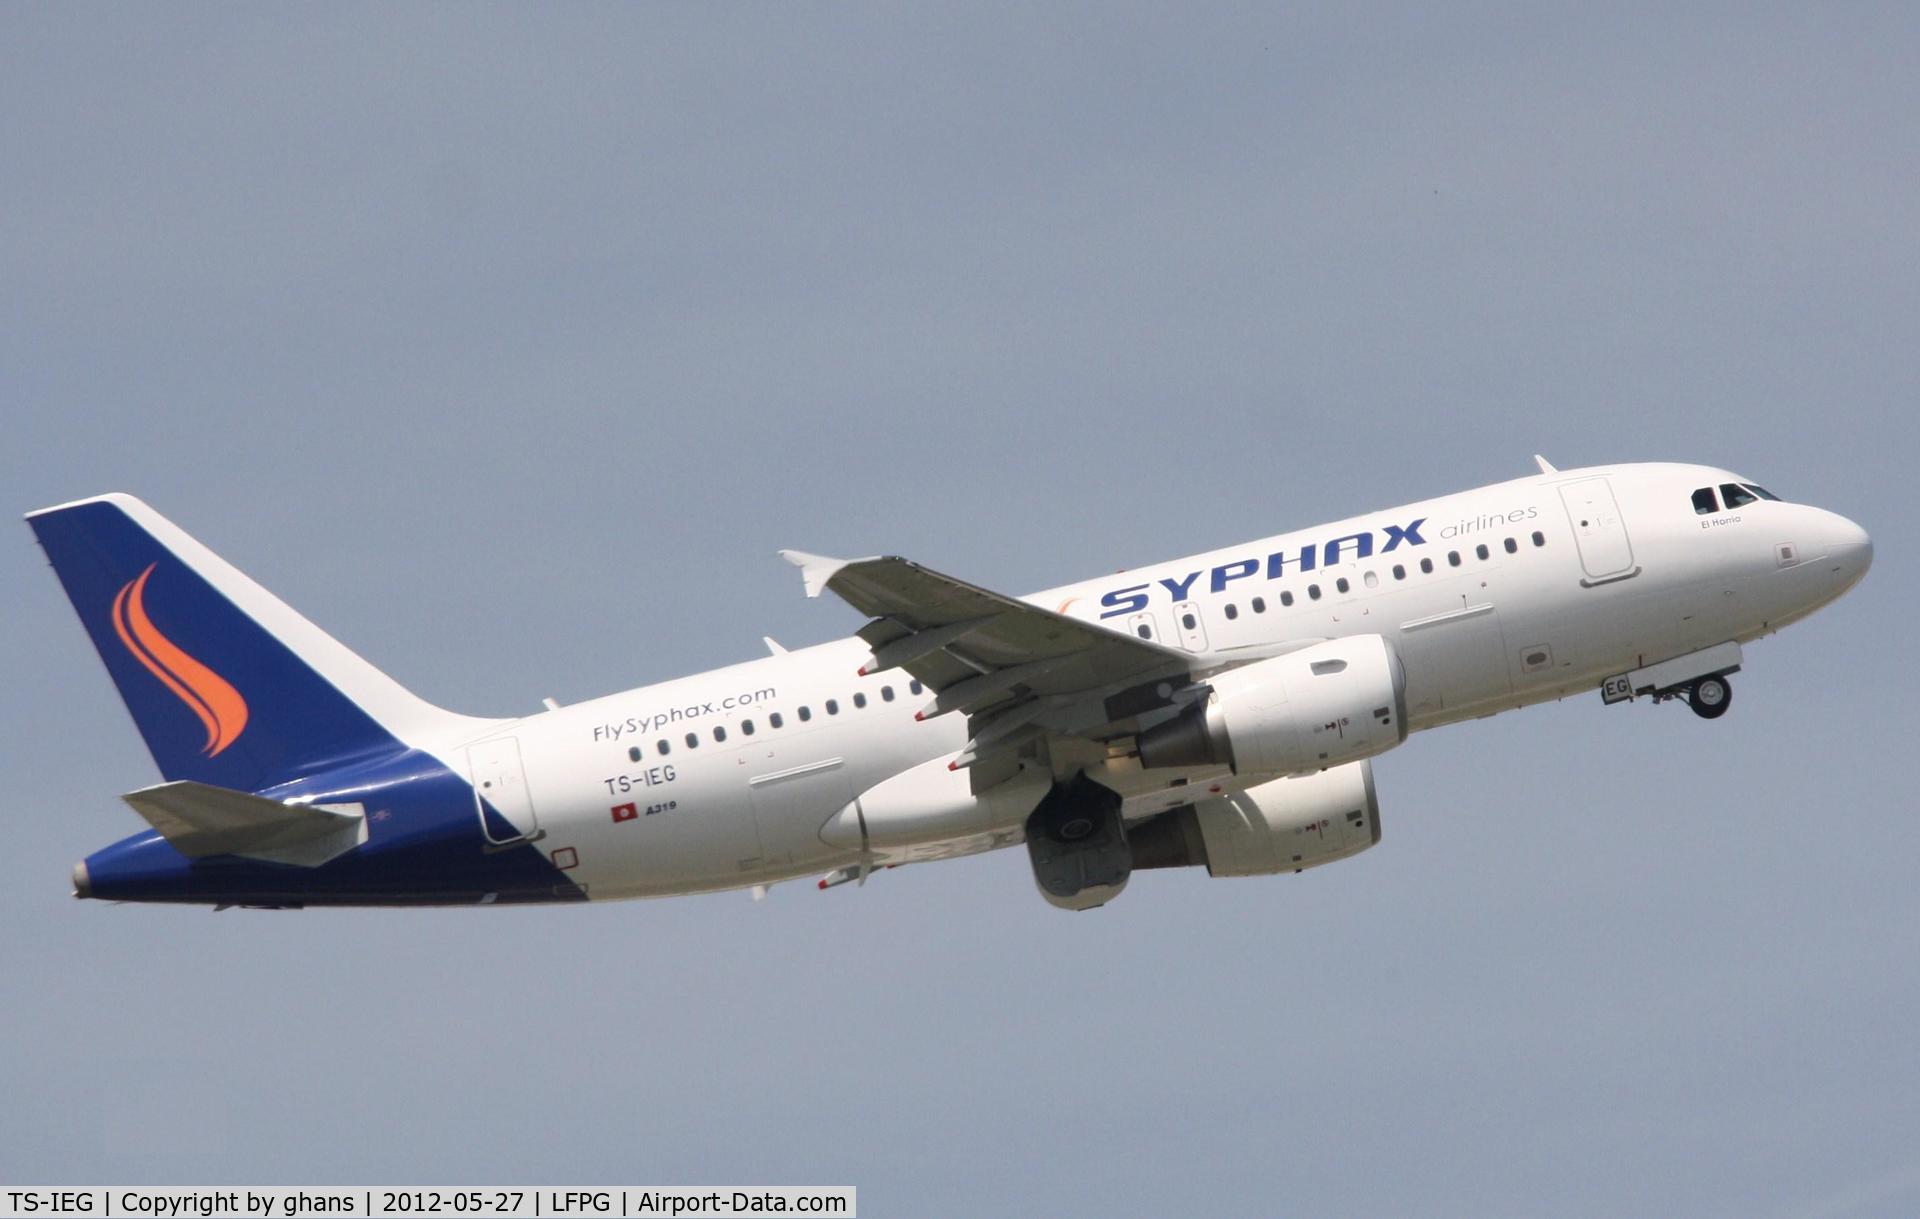 TS-IEG, 2009 Airbus A319-112 C/N 3872, Syphax Airlines